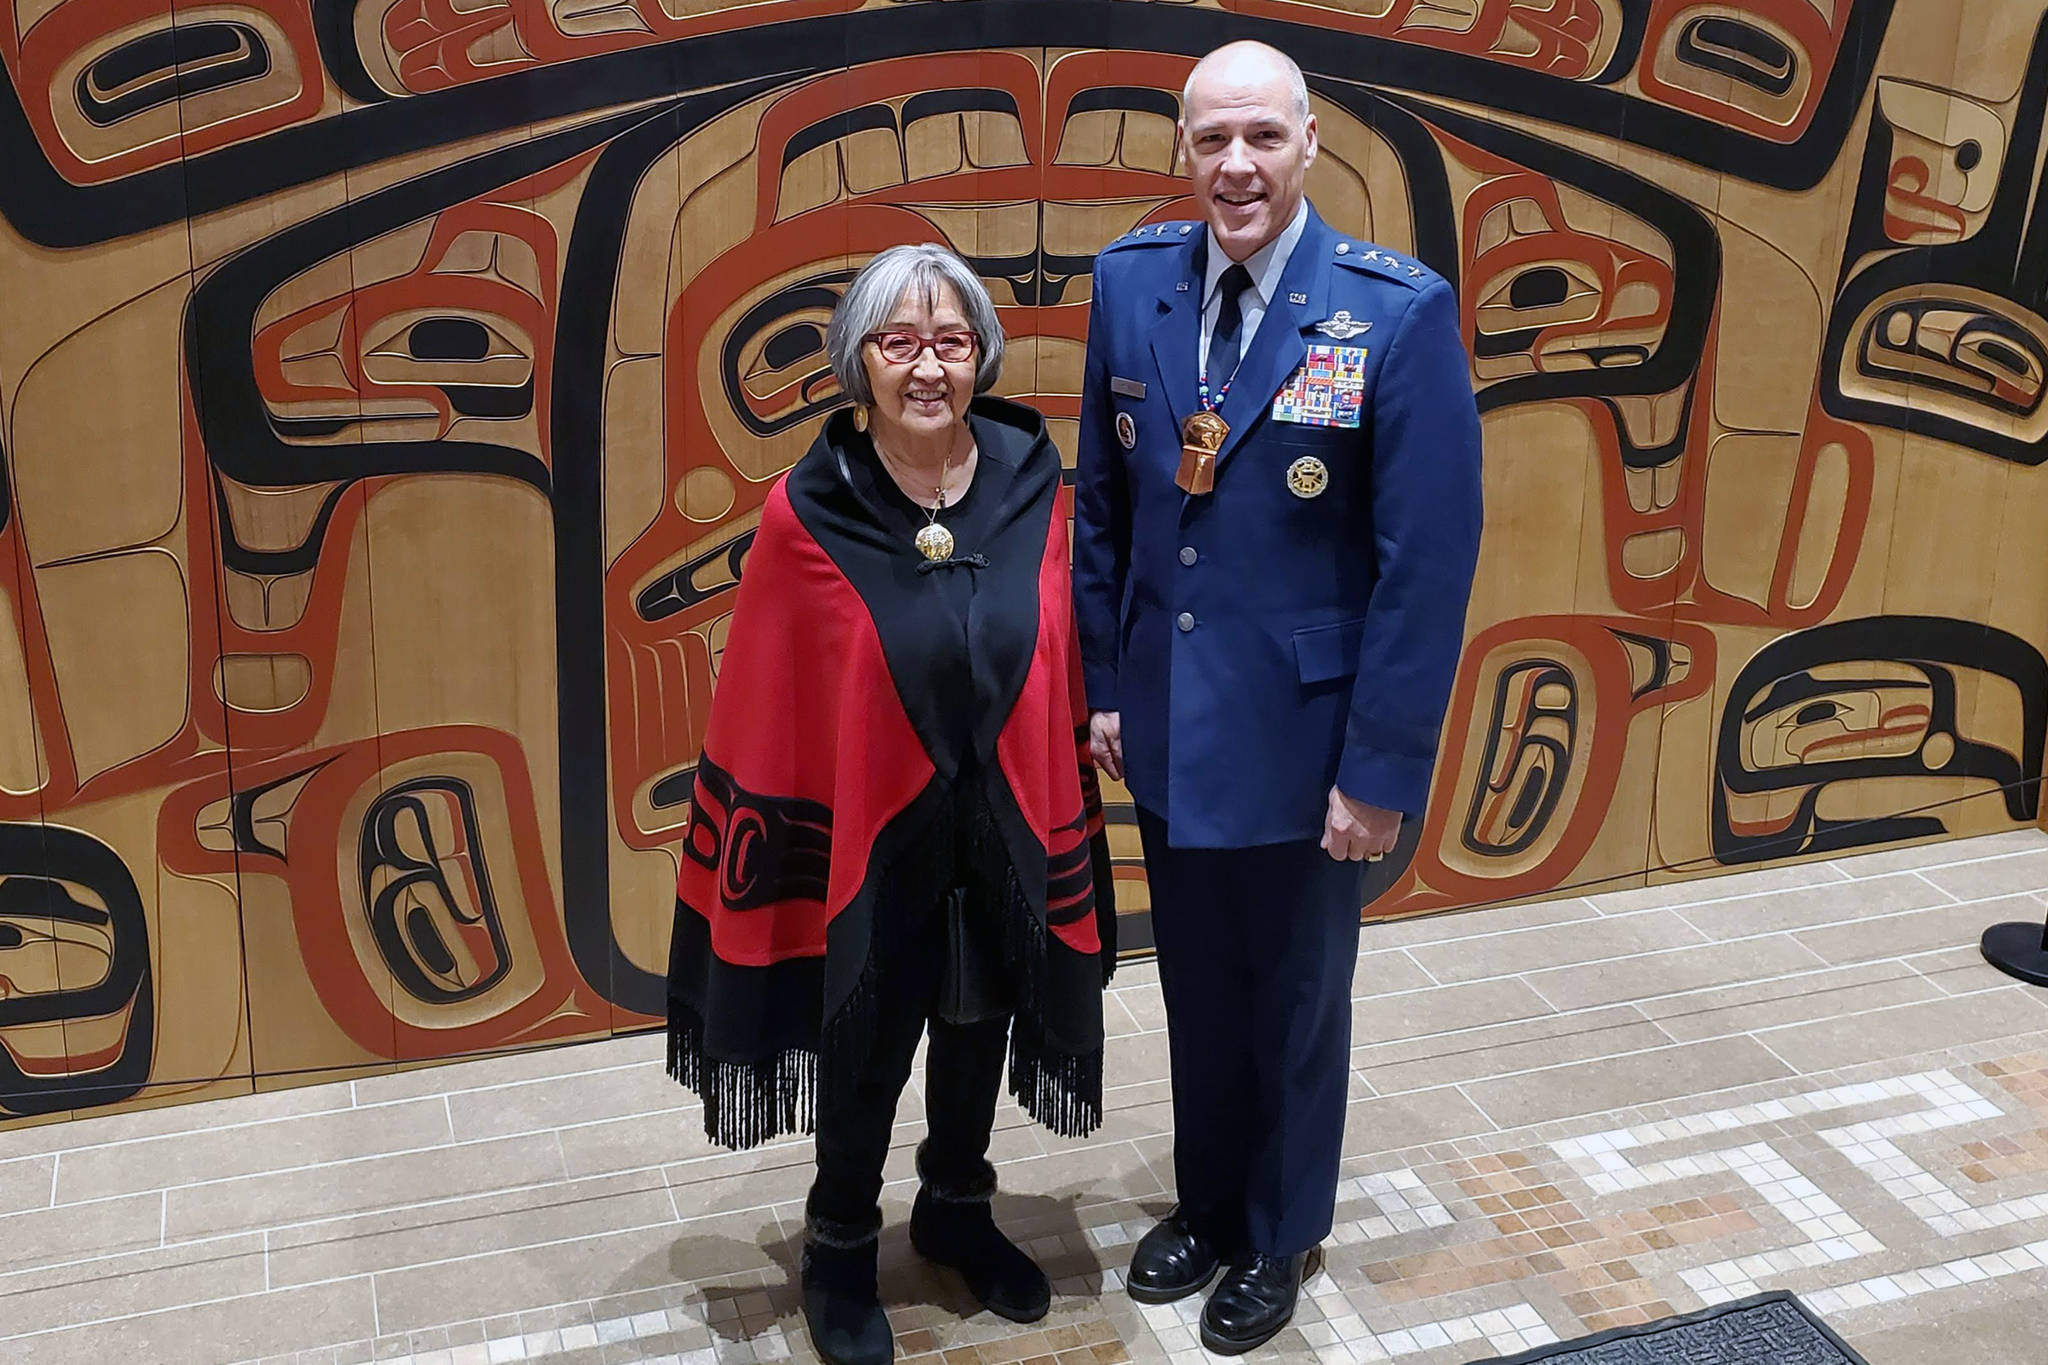 Ben Hohenstatt | Juneau Empire                                Sealaska Heritage Institute President Rosita Worl and Air Force Lt. Gen. Tom Bussiere, Commander for Alaskan Command, stand together following a day of meetings at SHI’s Walter Soboleff Building.